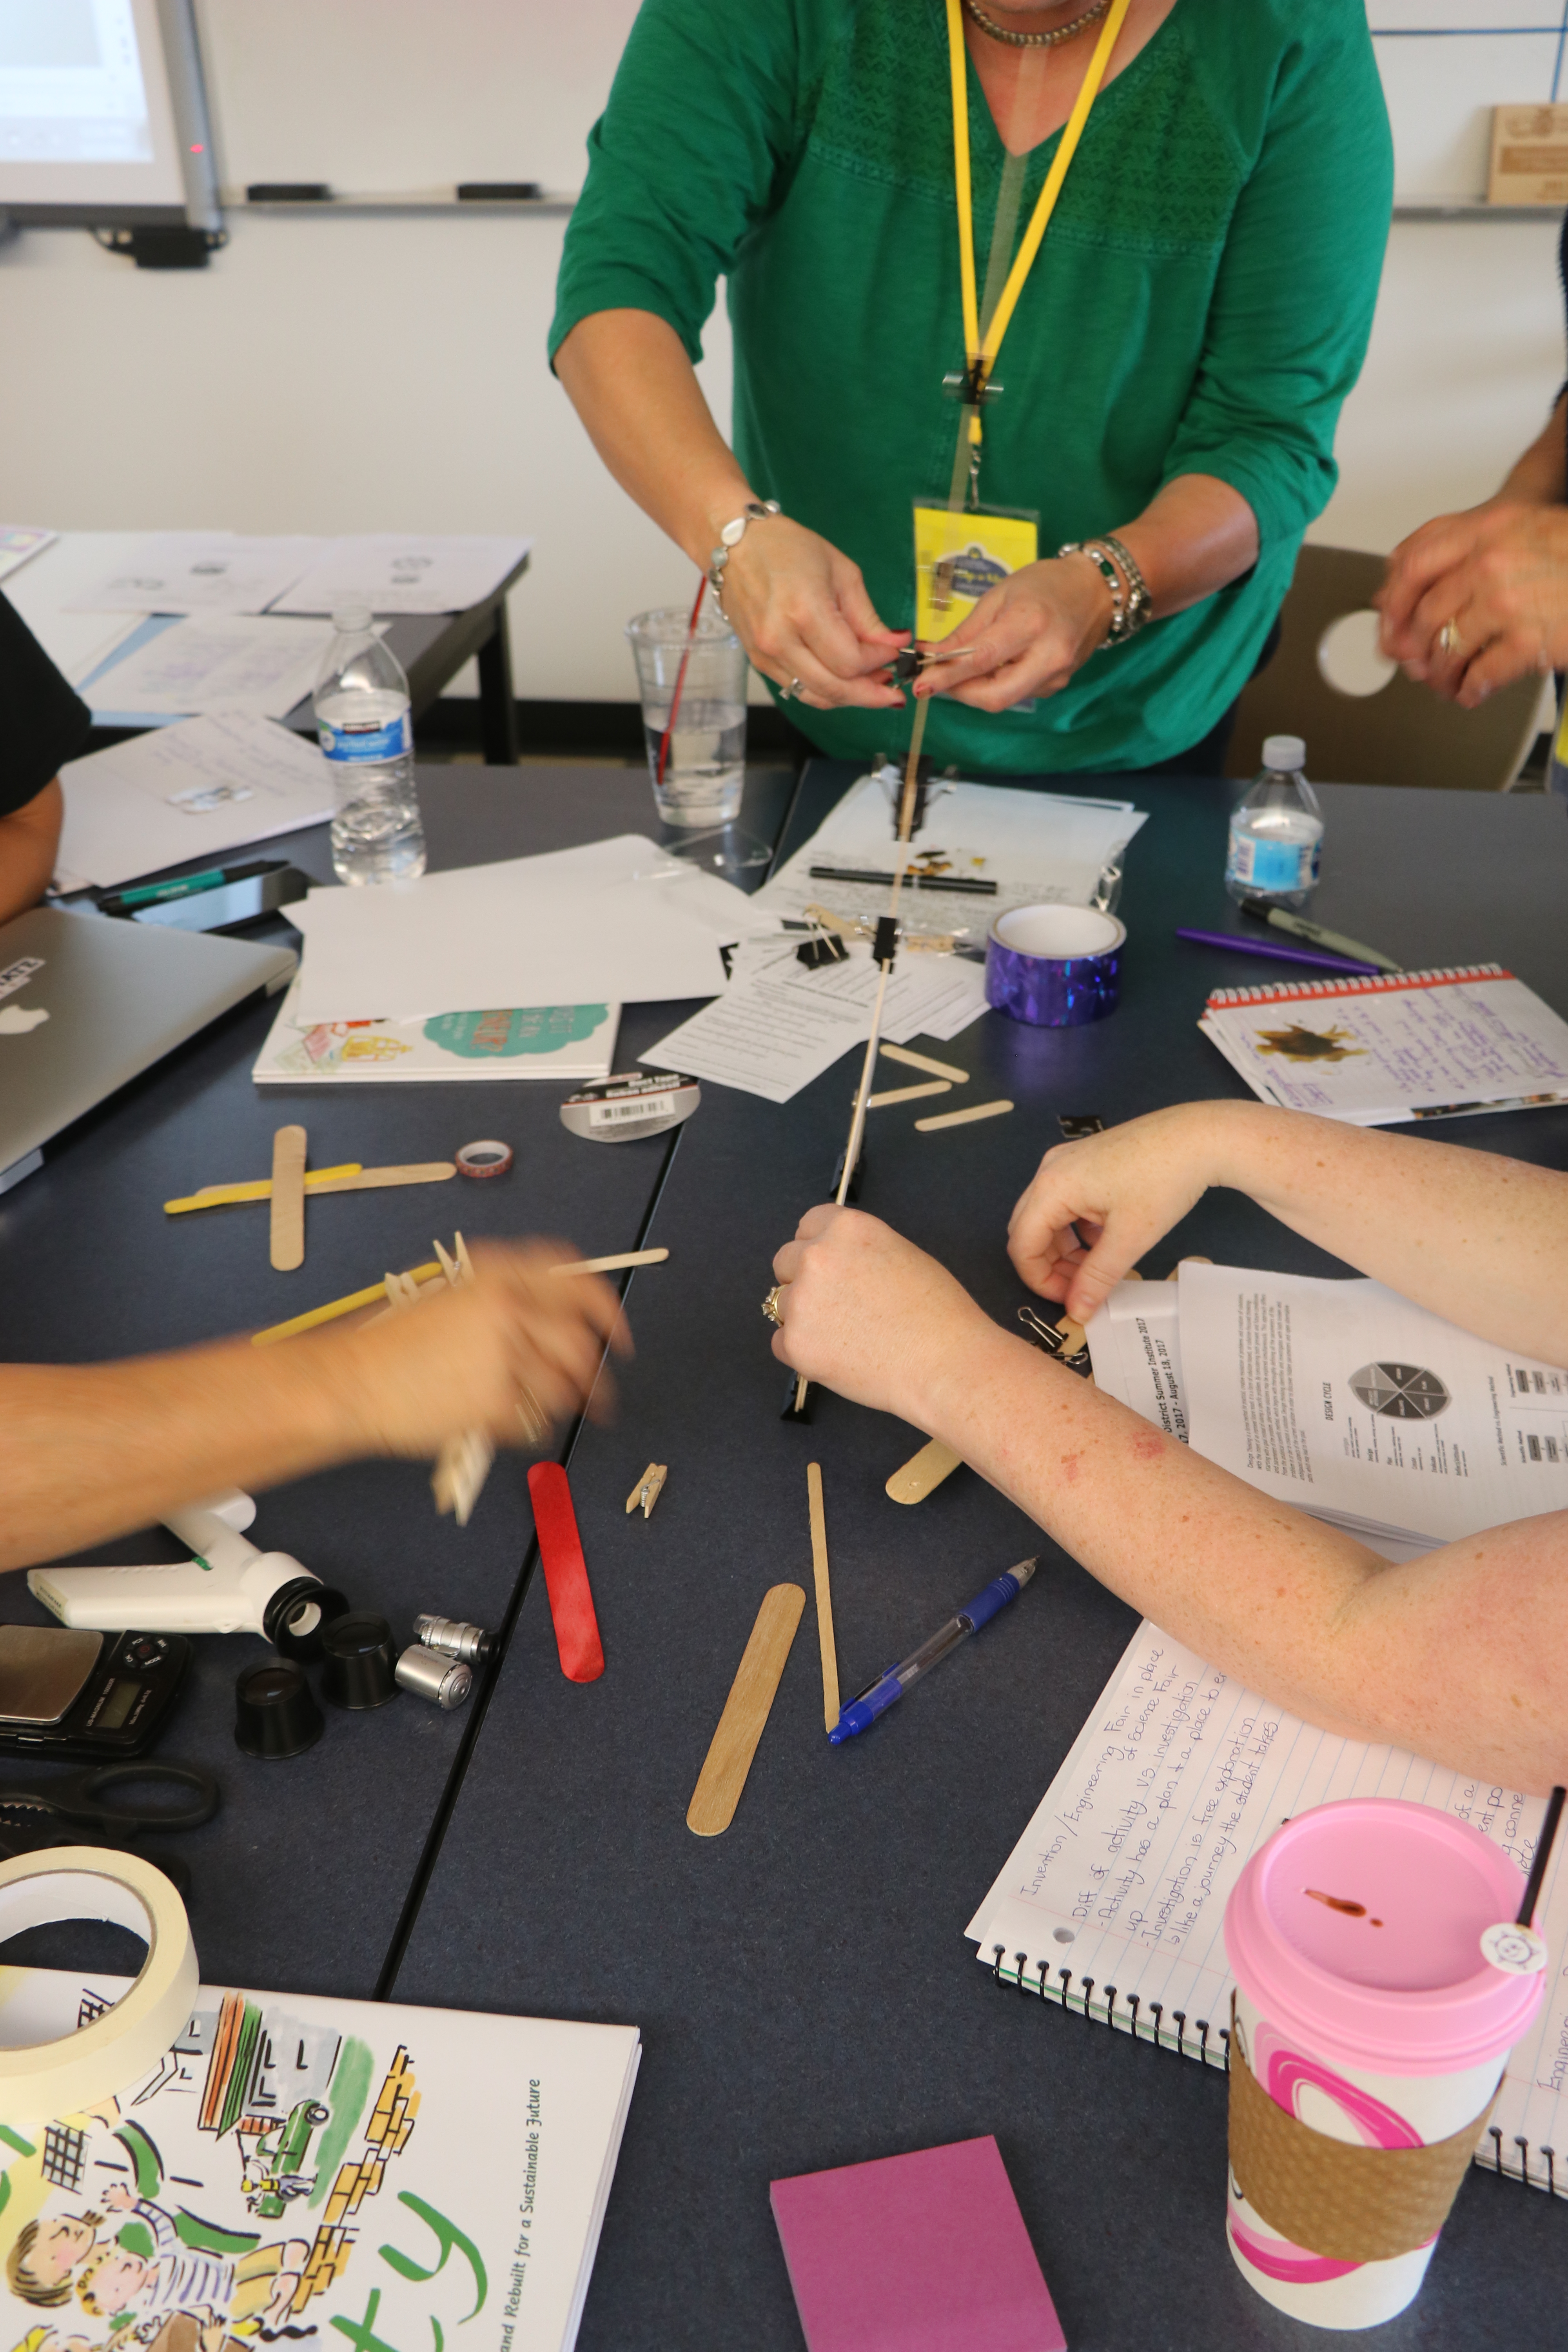 STEM and MakerEd teacher training by Dr. Diana Wehrell-Grabowski